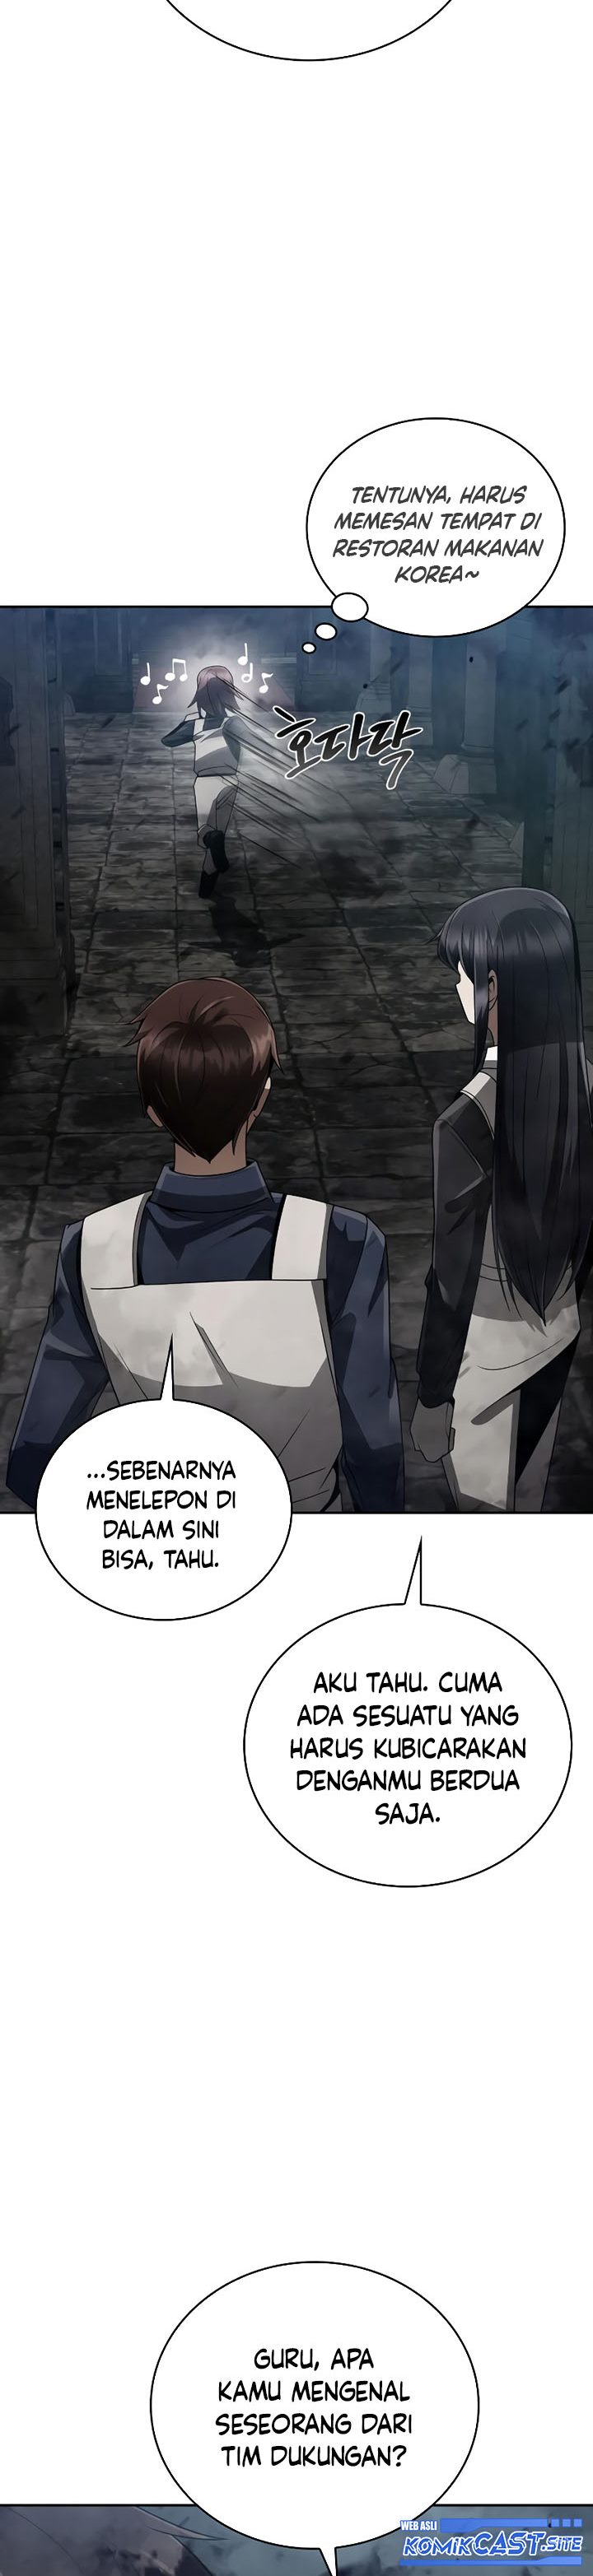 Dilarang COPAS - situs resmi www.mangacanblog.com - Komik clever cleaning life of the returned genius hunter 019 - chapter 19 20 Indonesia clever cleaning life of the returned genius hunter 019 - chapter 19 Terbaru 17|Baca Manga Komik Indonesia|Mangacan